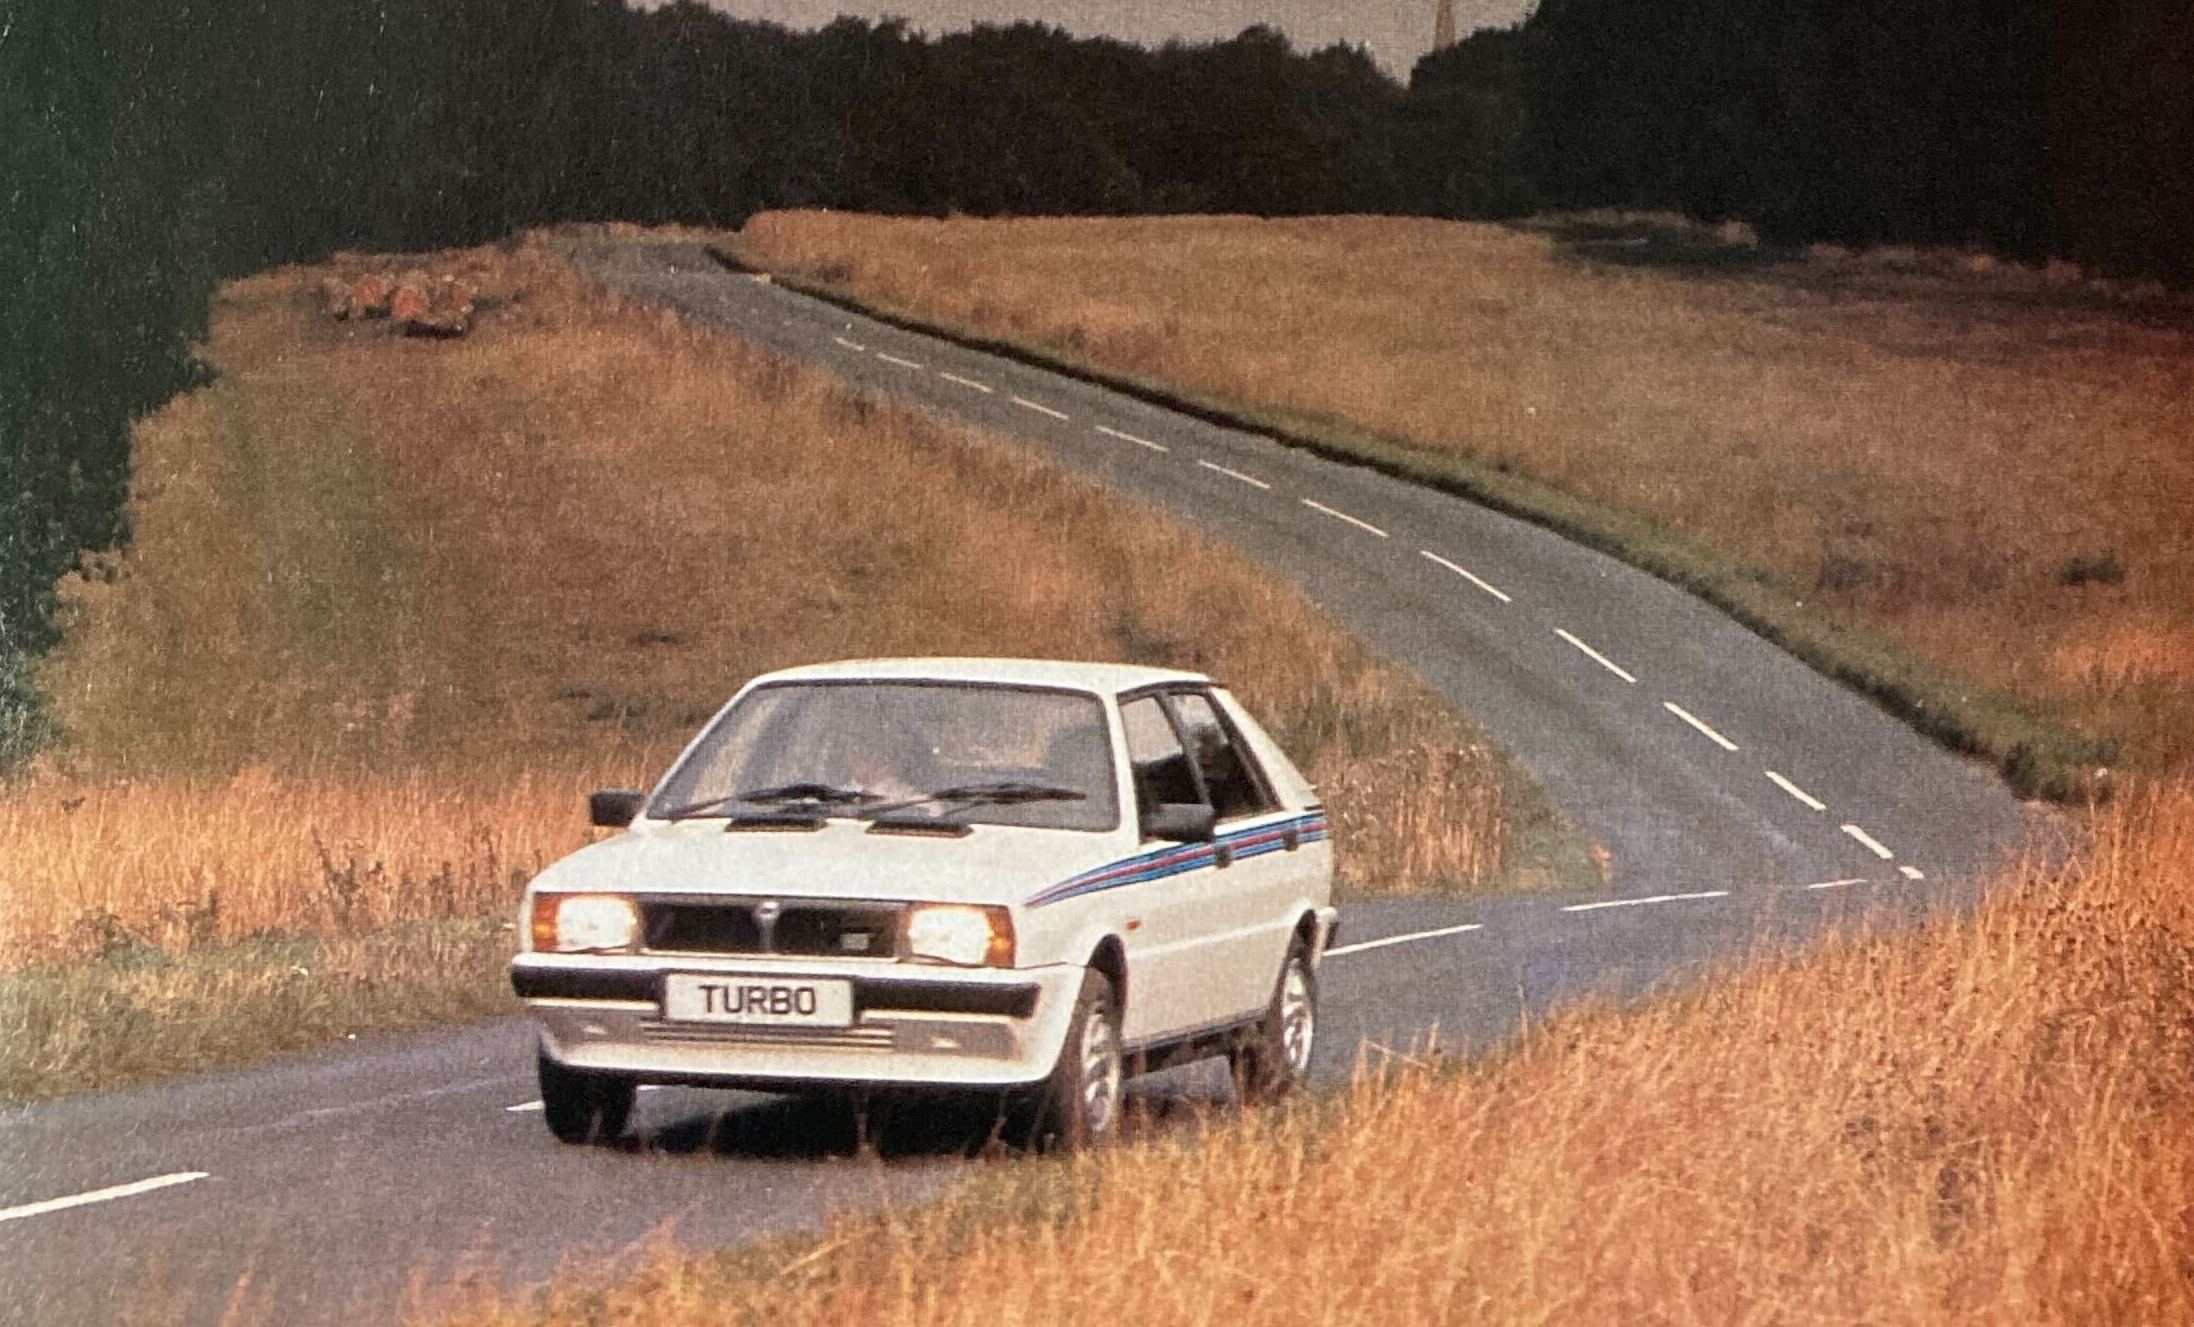 Ad Break: The Lancia Delta HF Turbo offered 121mph in your favourite chair